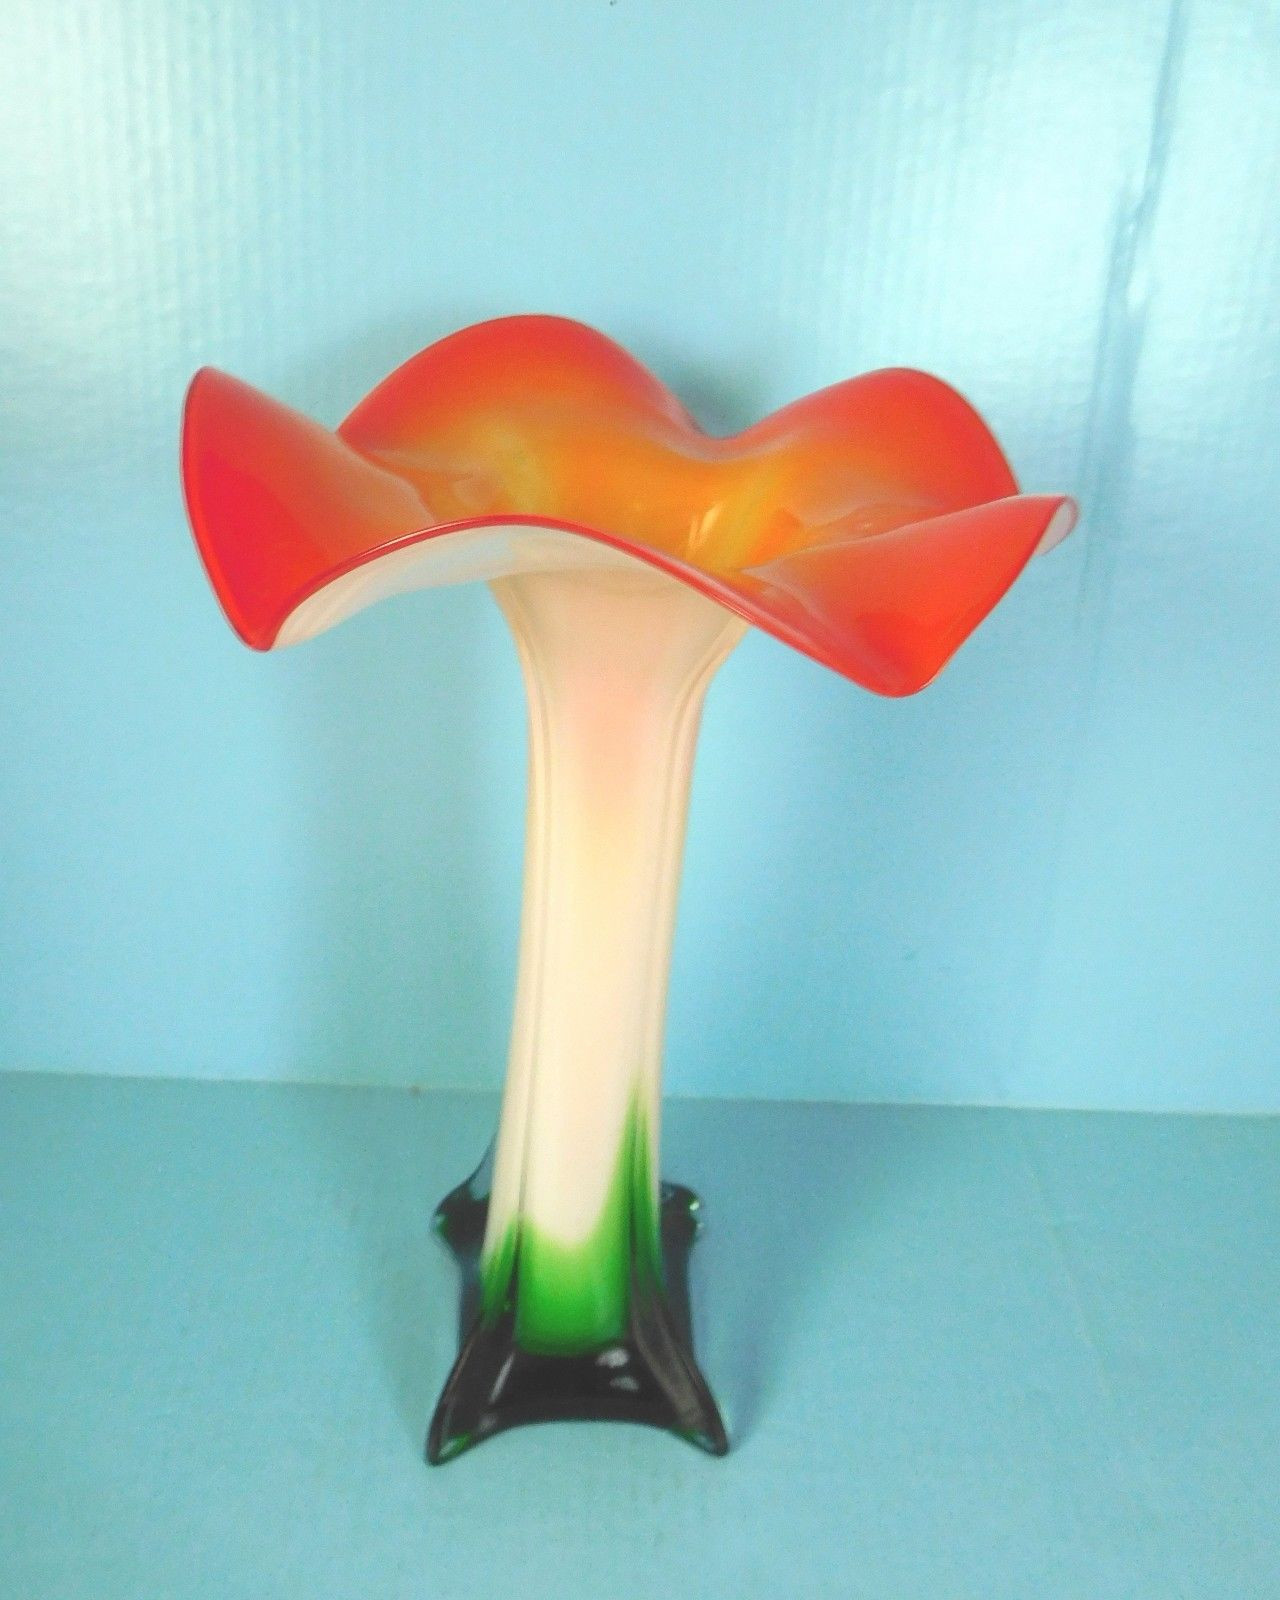 orrefors crystal vase sweden signed of flower petal retro art glass vase 14 25 tall poppy red green with 1 of 8 see more